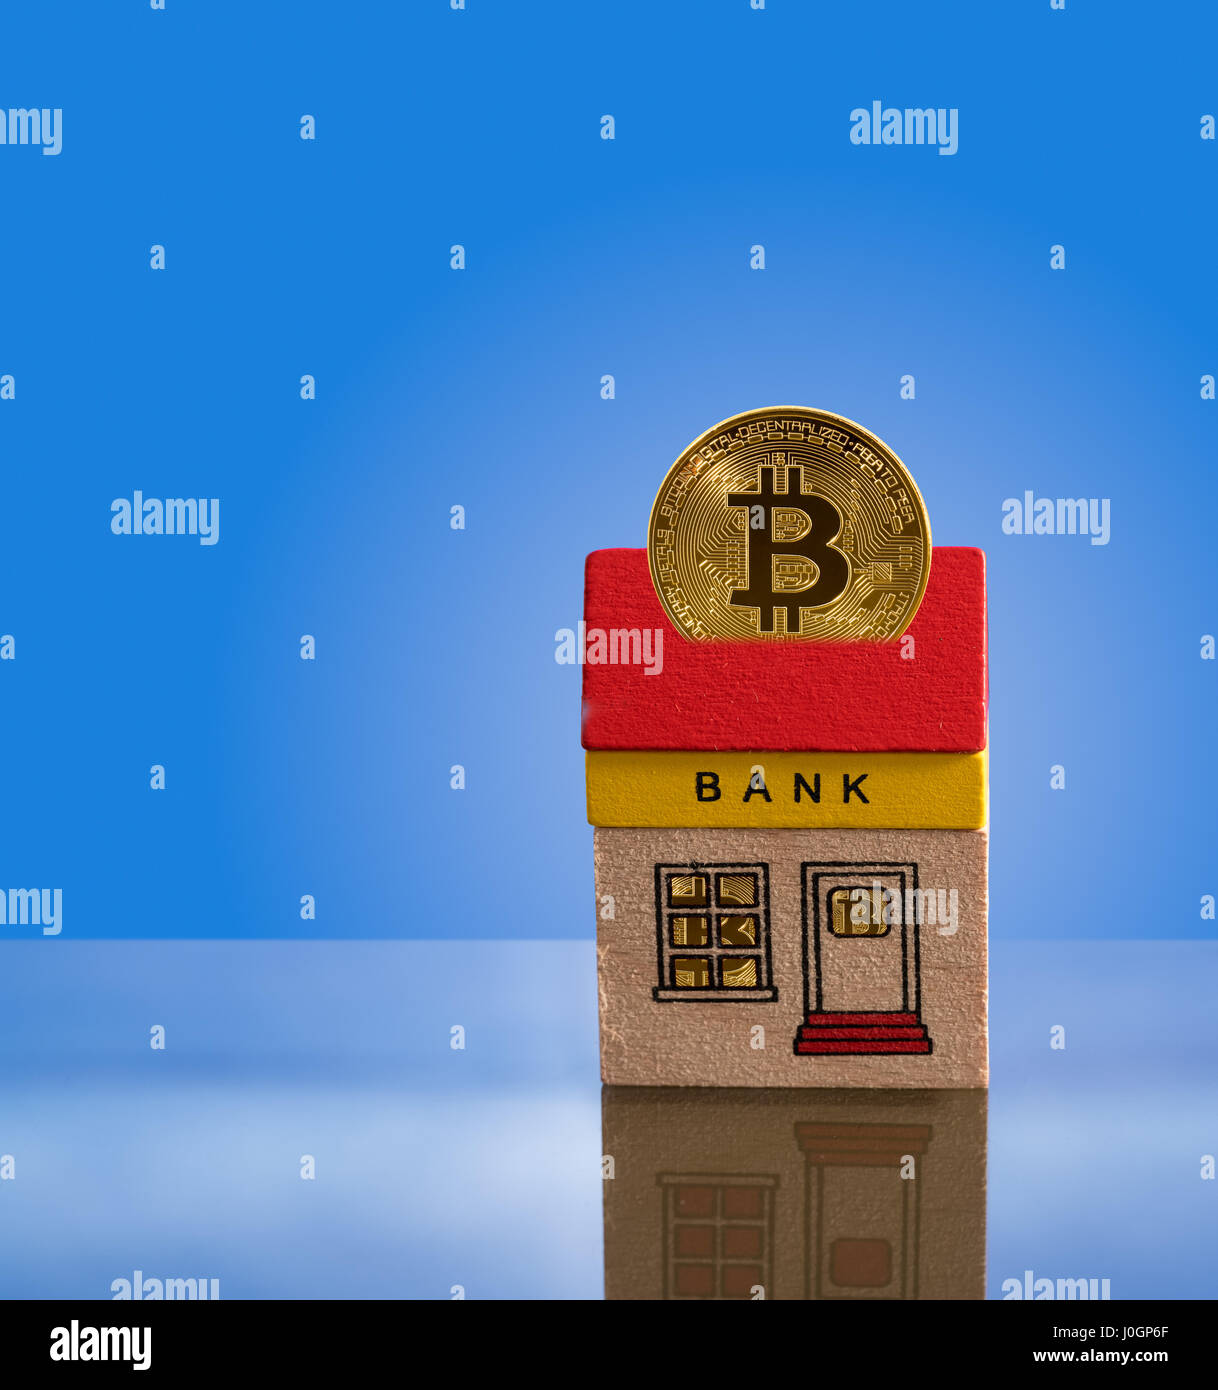 Toy bank building with bitcoin assets Stock Photo